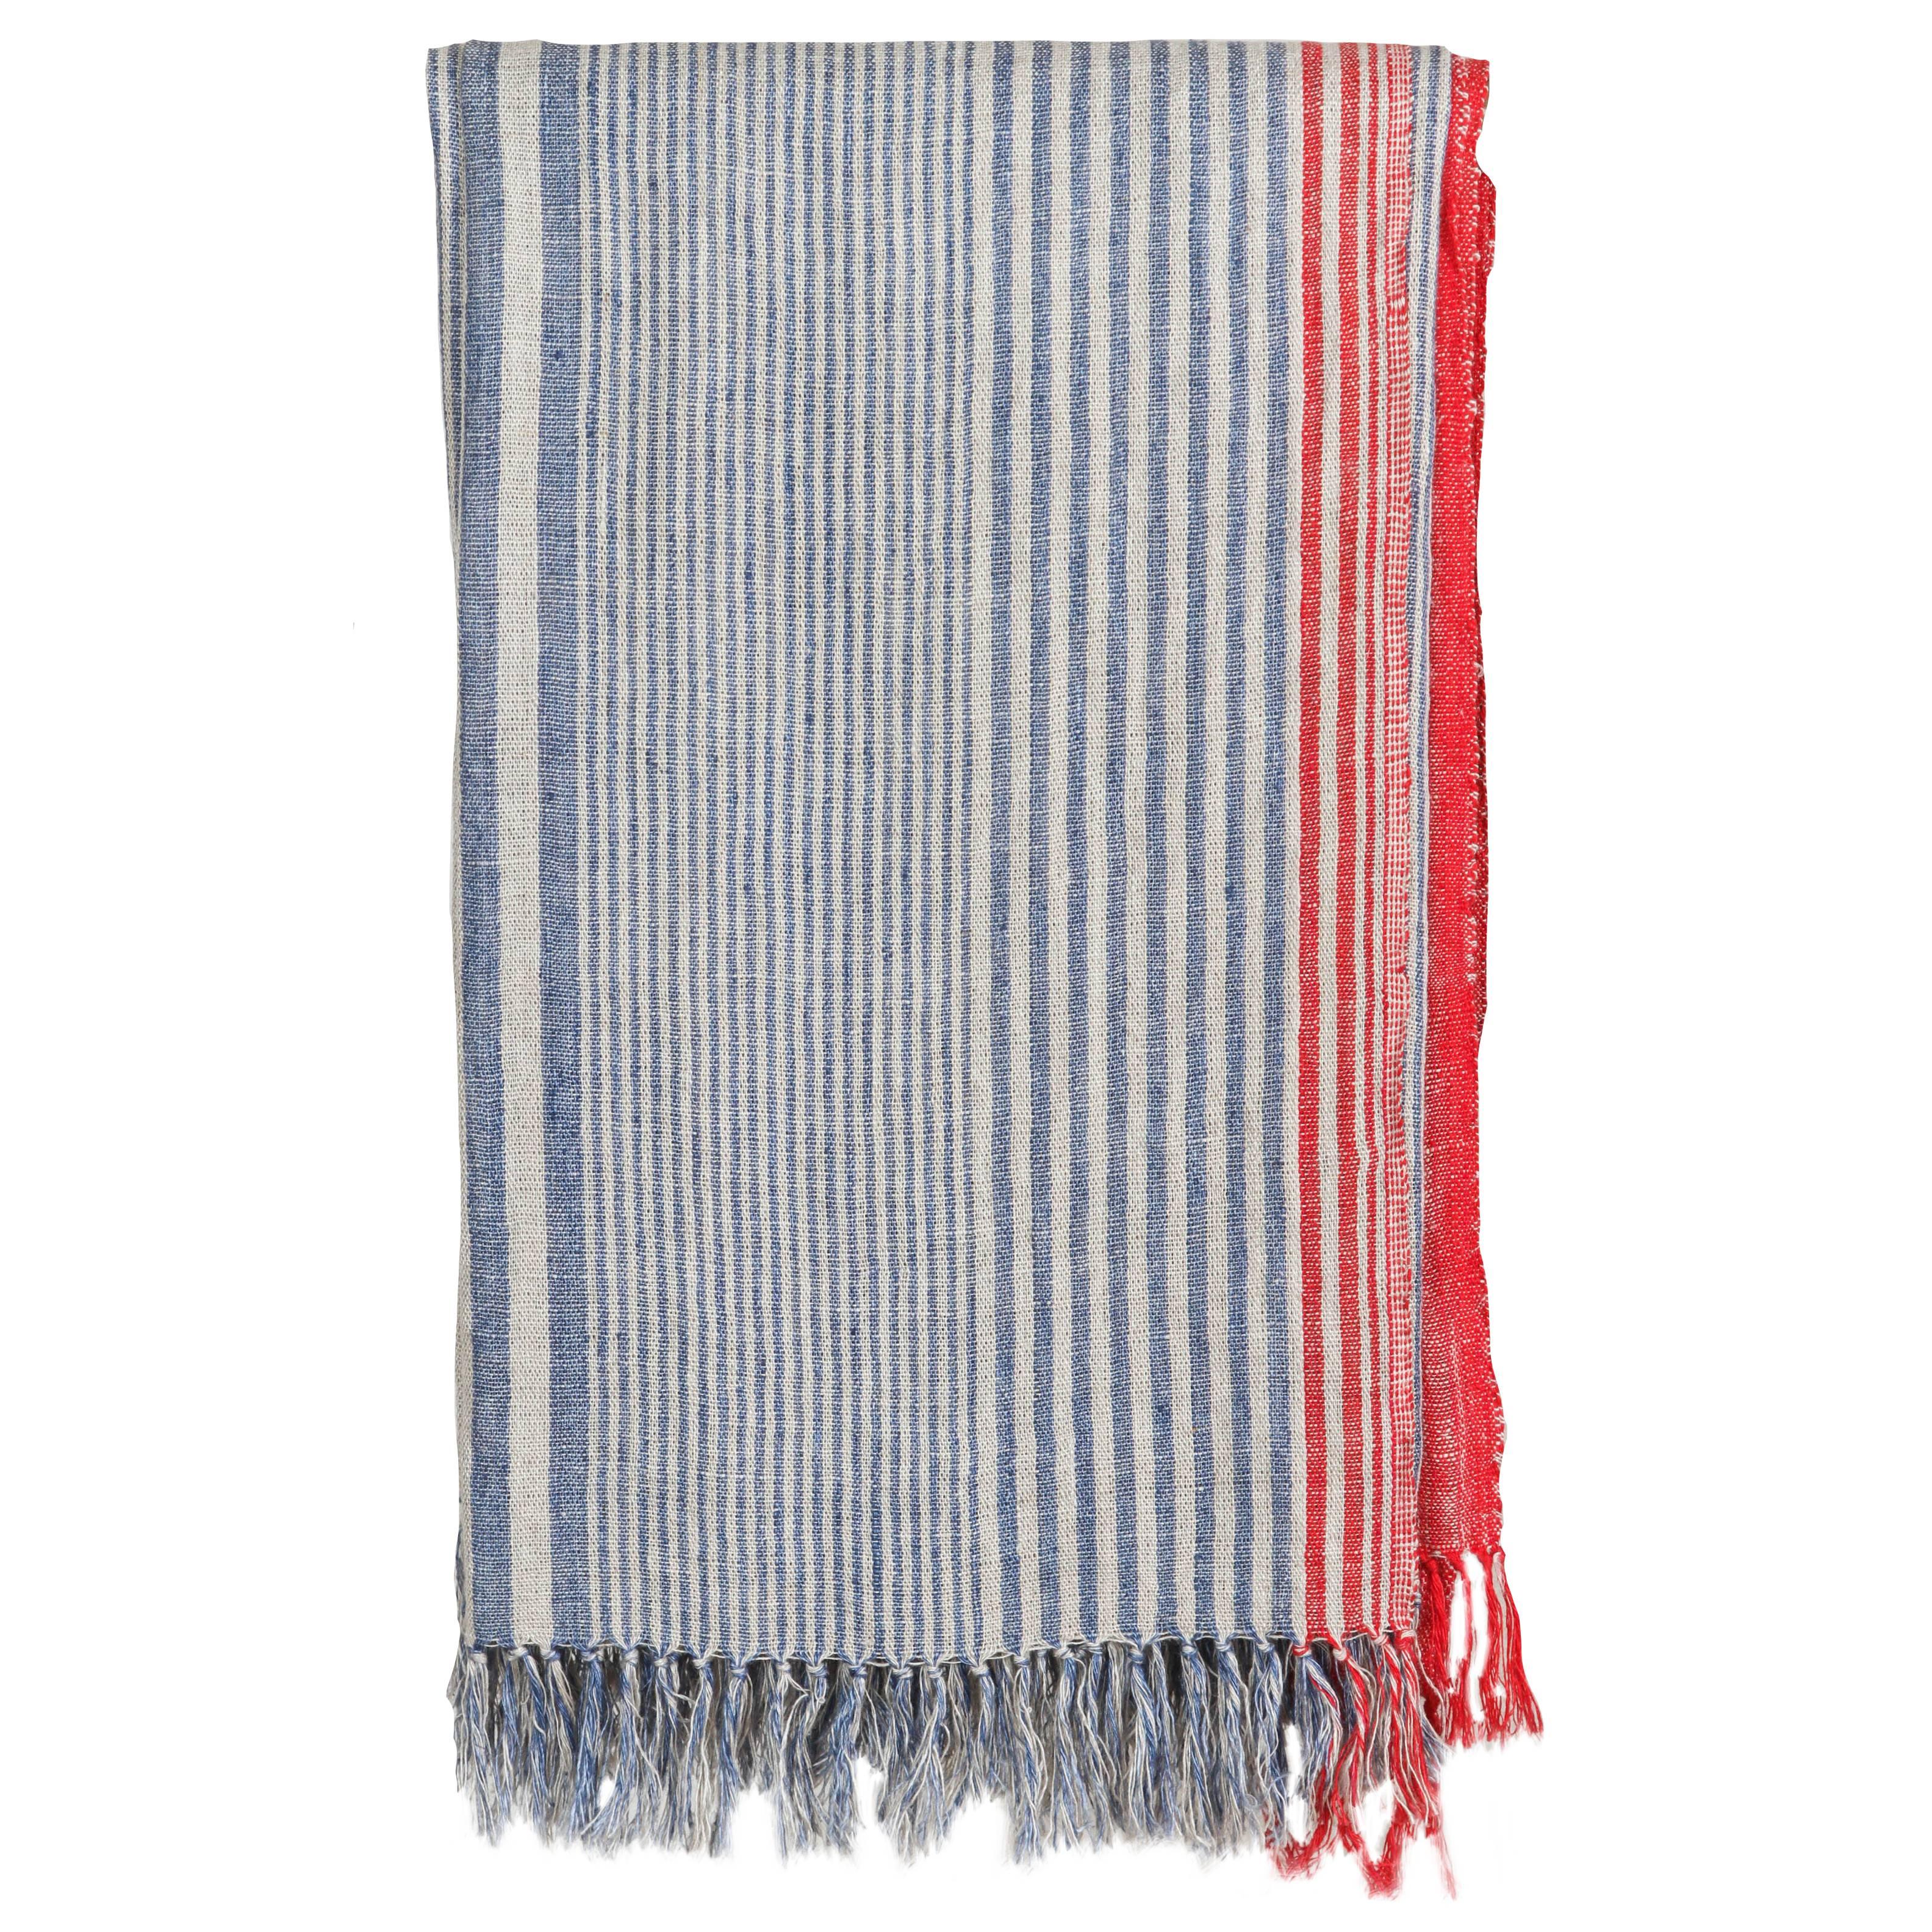 Indian Handwoven Throw, Blue, Red and White. Linen. For Sale